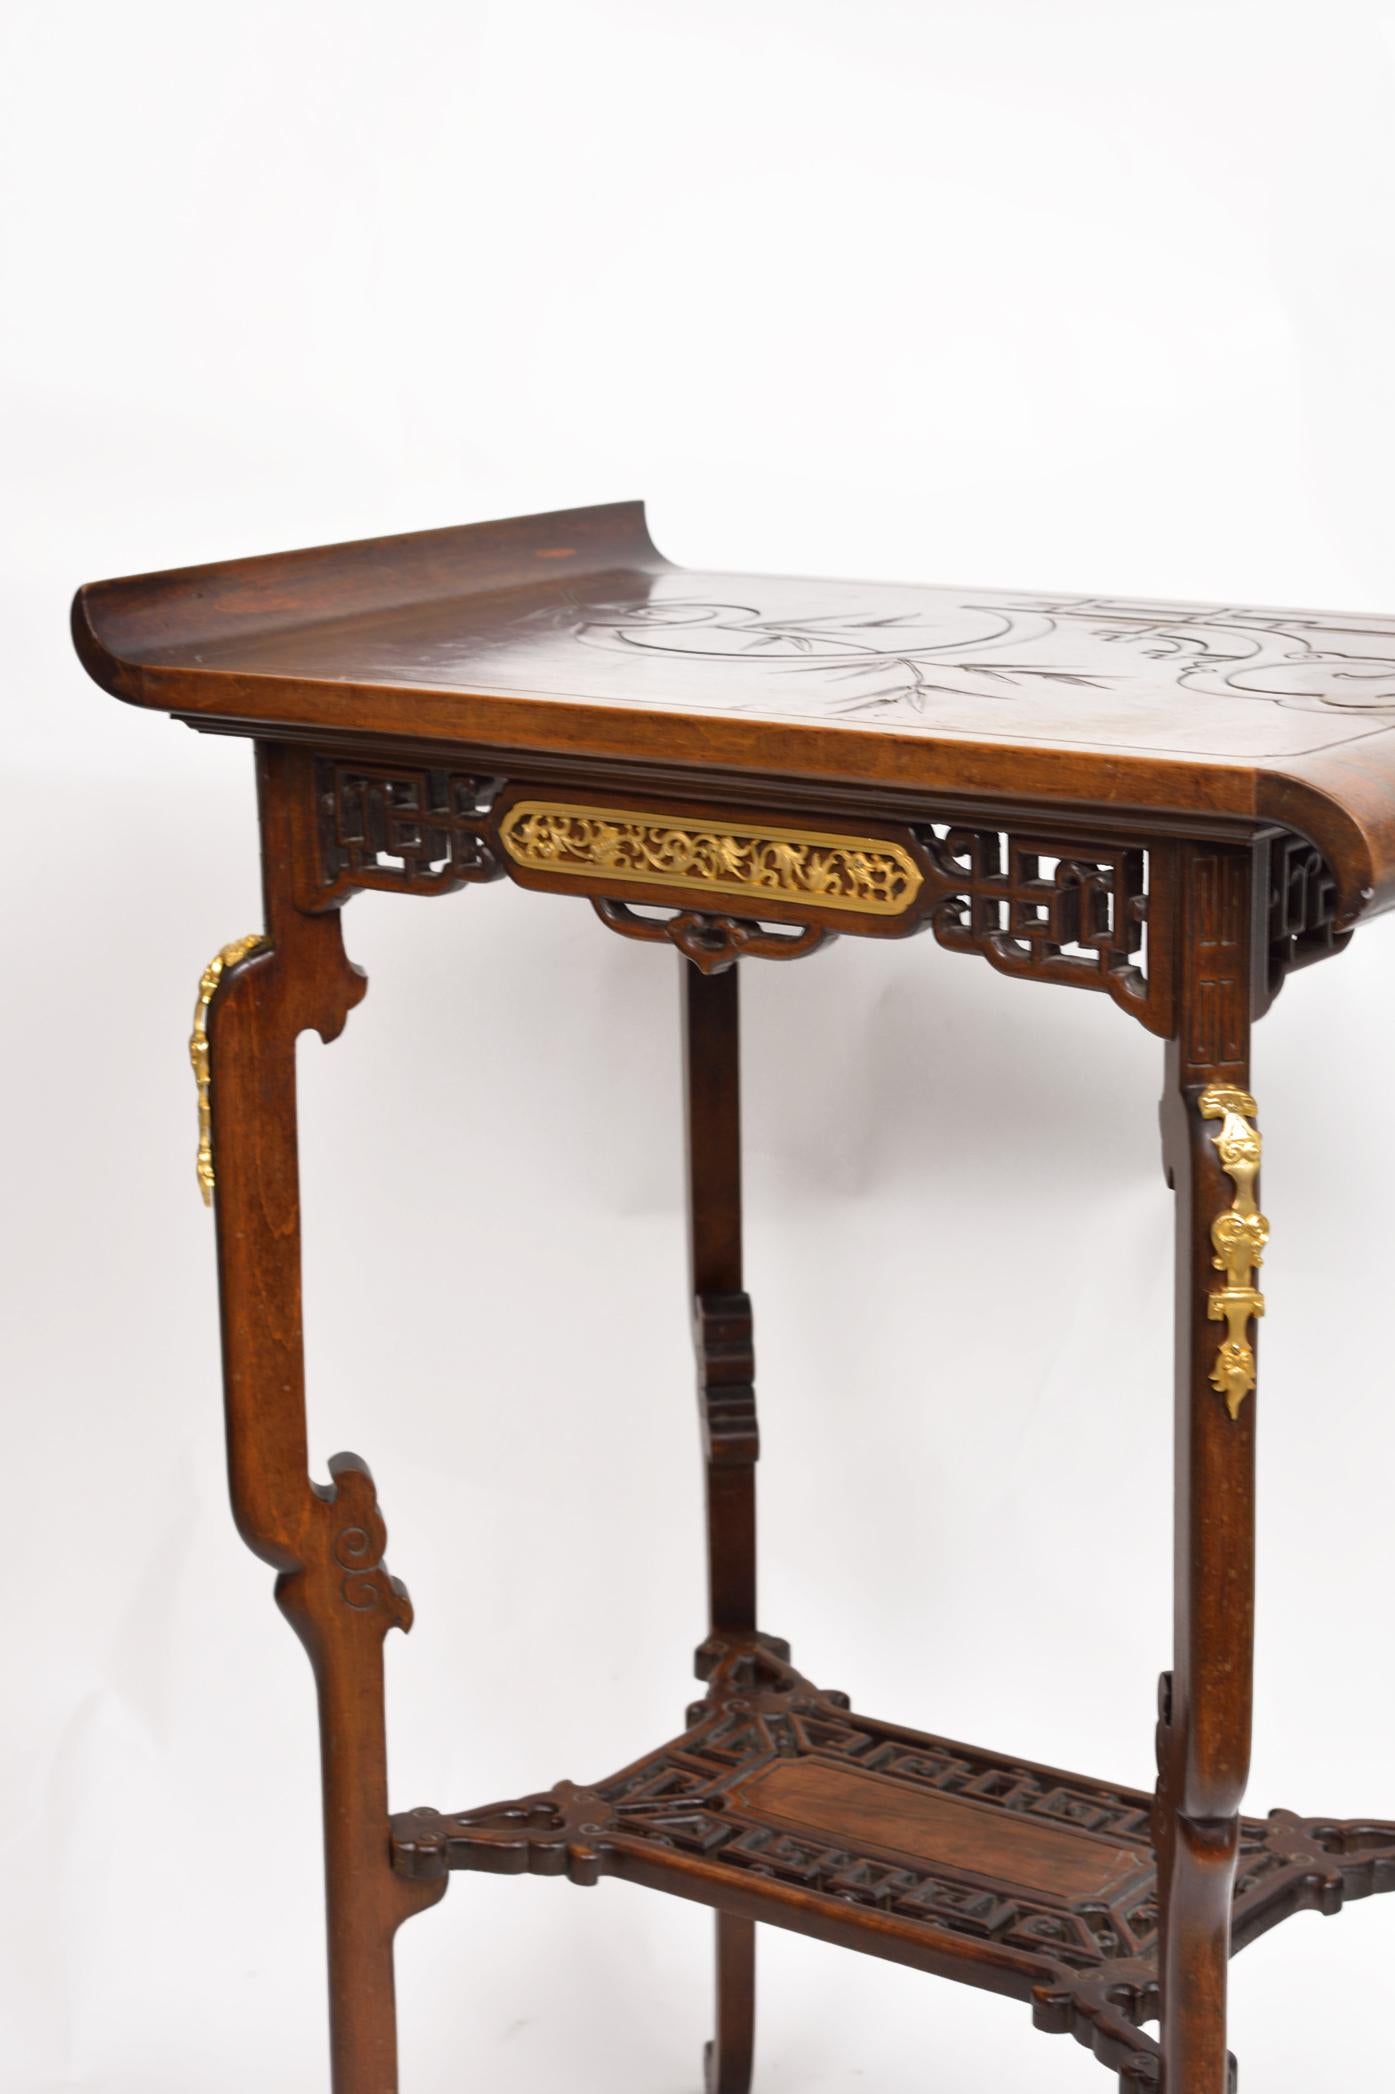 French Exquisite Japanese-Style Table by Gabriel Viardot, circa 1880